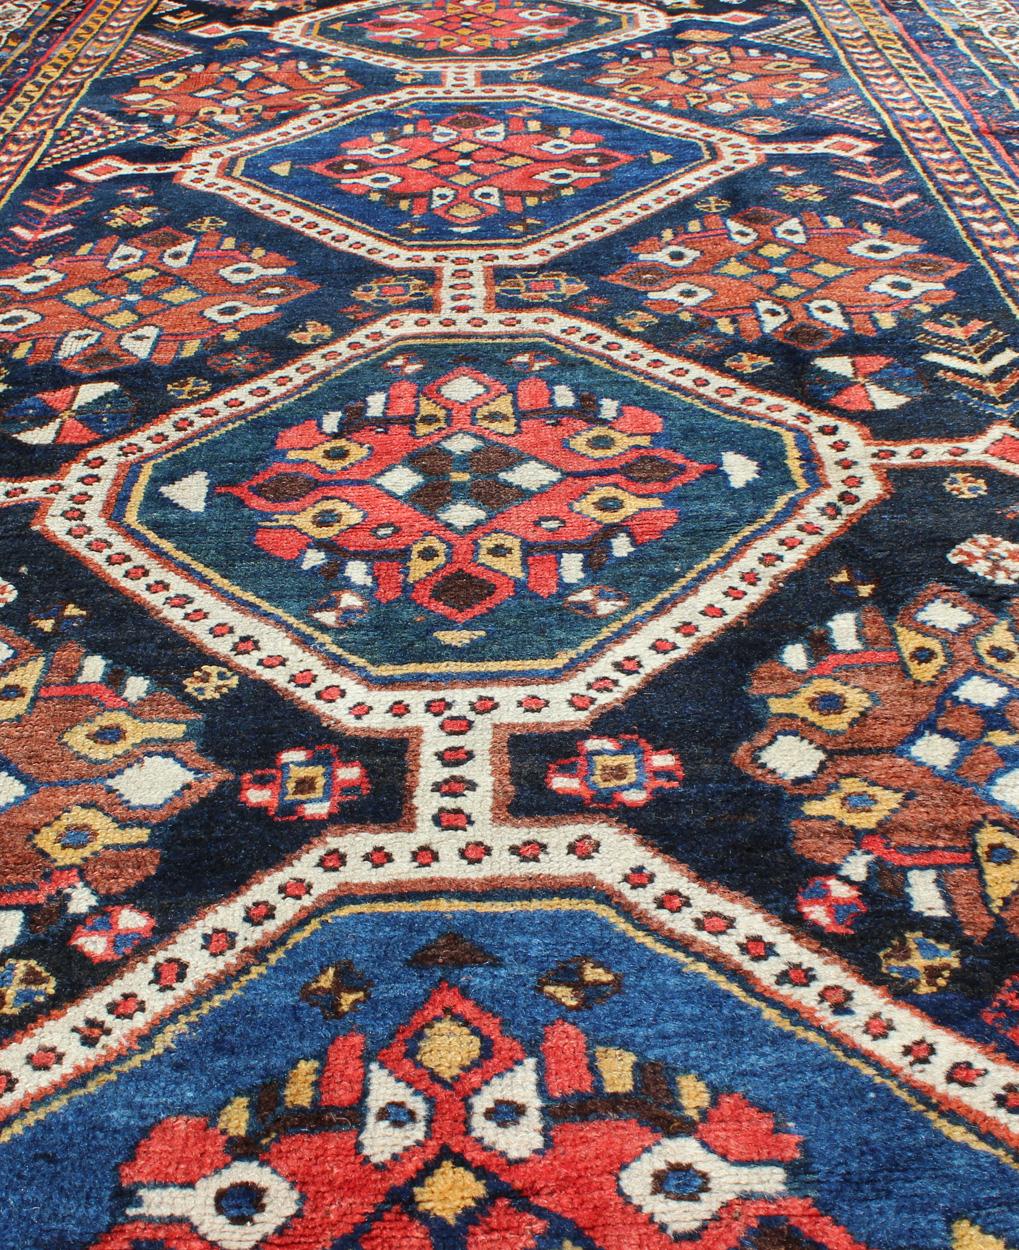 Antique Persian Qashqai Rug with Four-Medallion Design in Blue, Red, Brown Tones For Sale 2